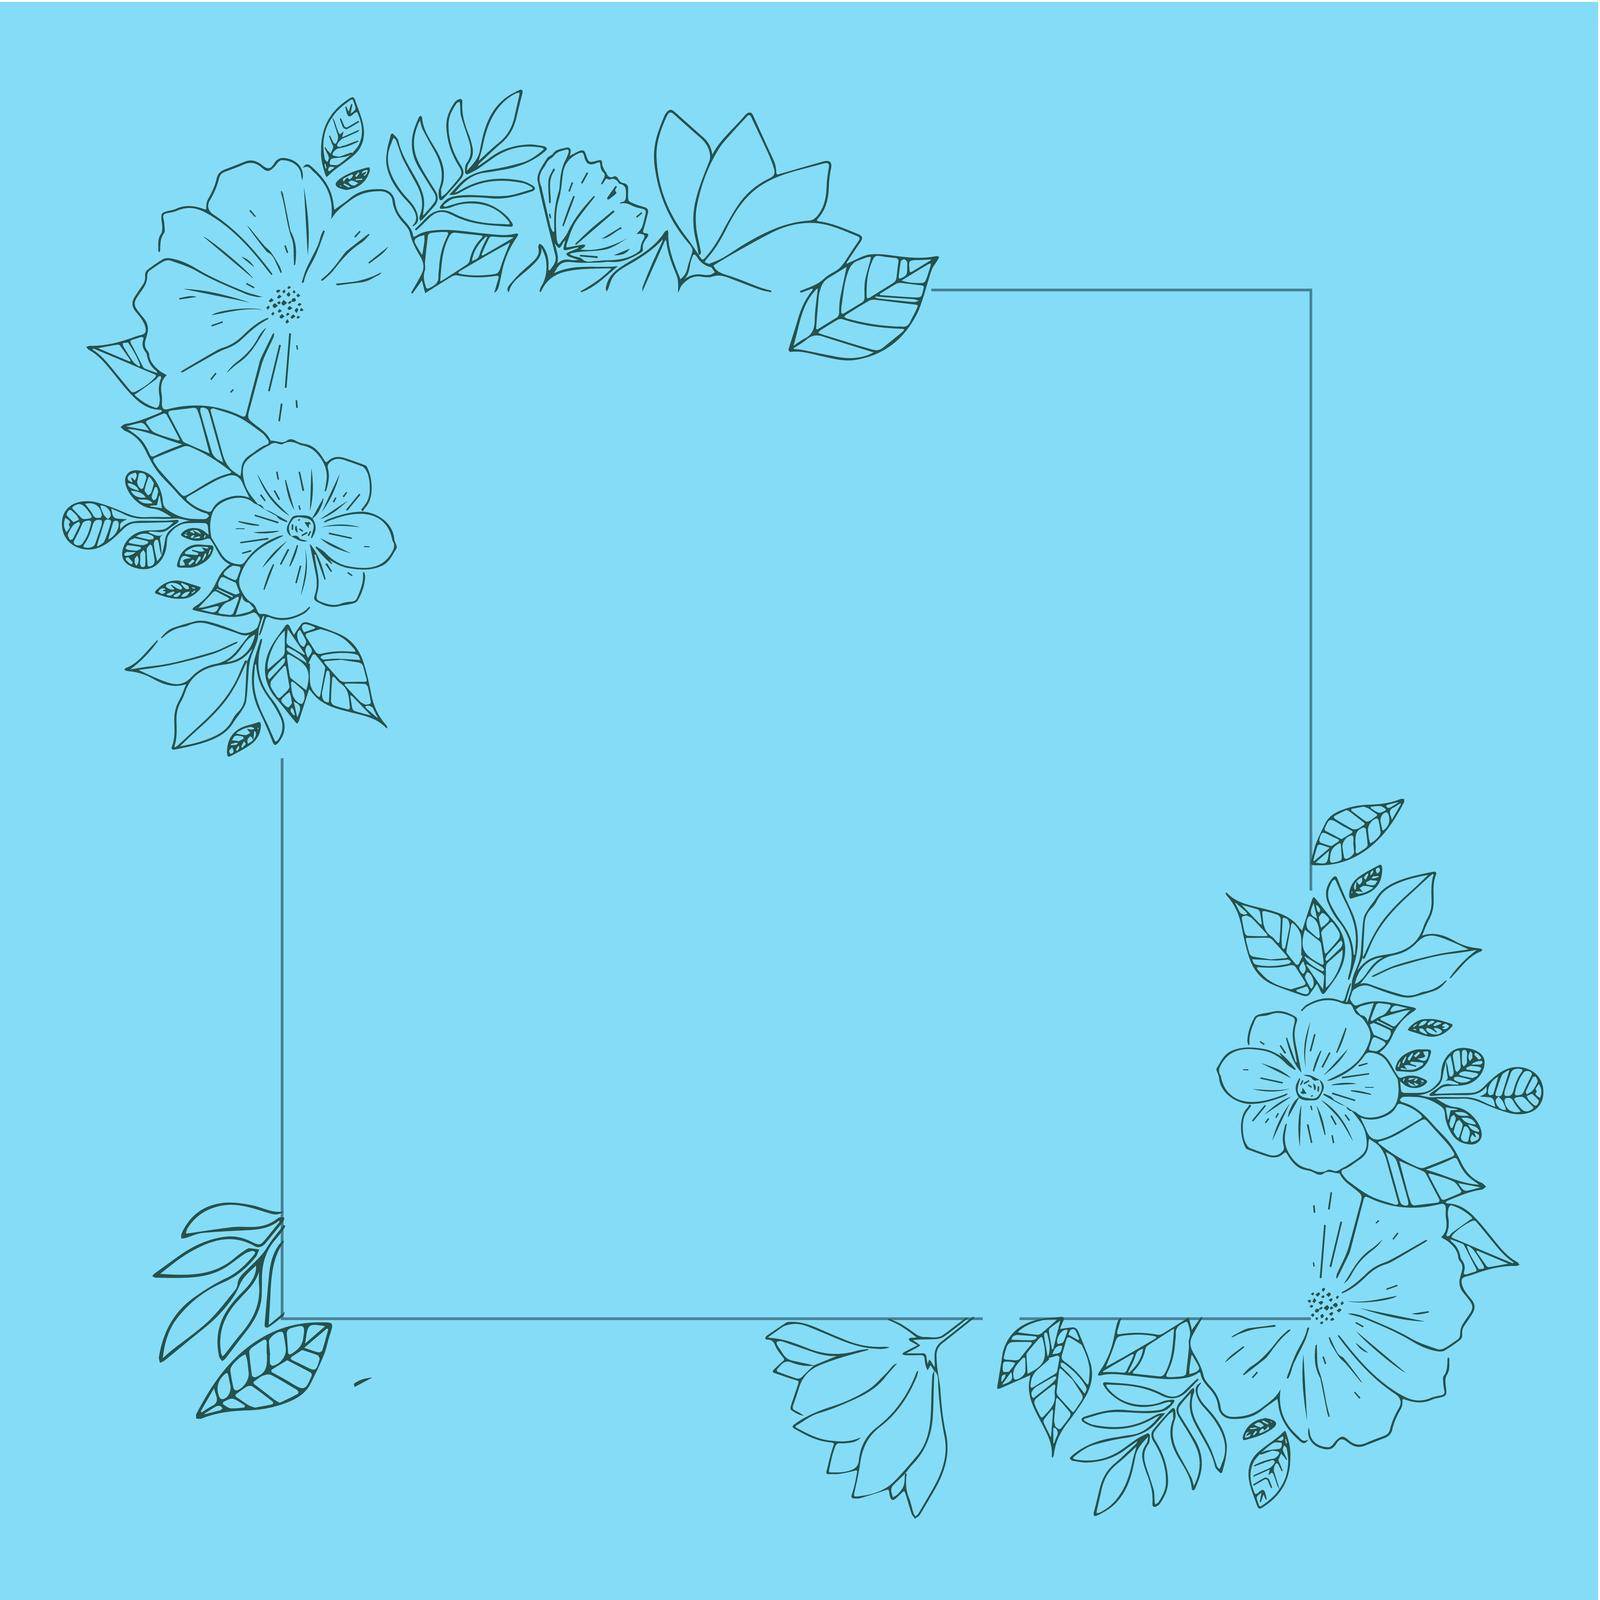 Blank Frame Decorated With Abstract Modernized Forms Flowers And Foliage.